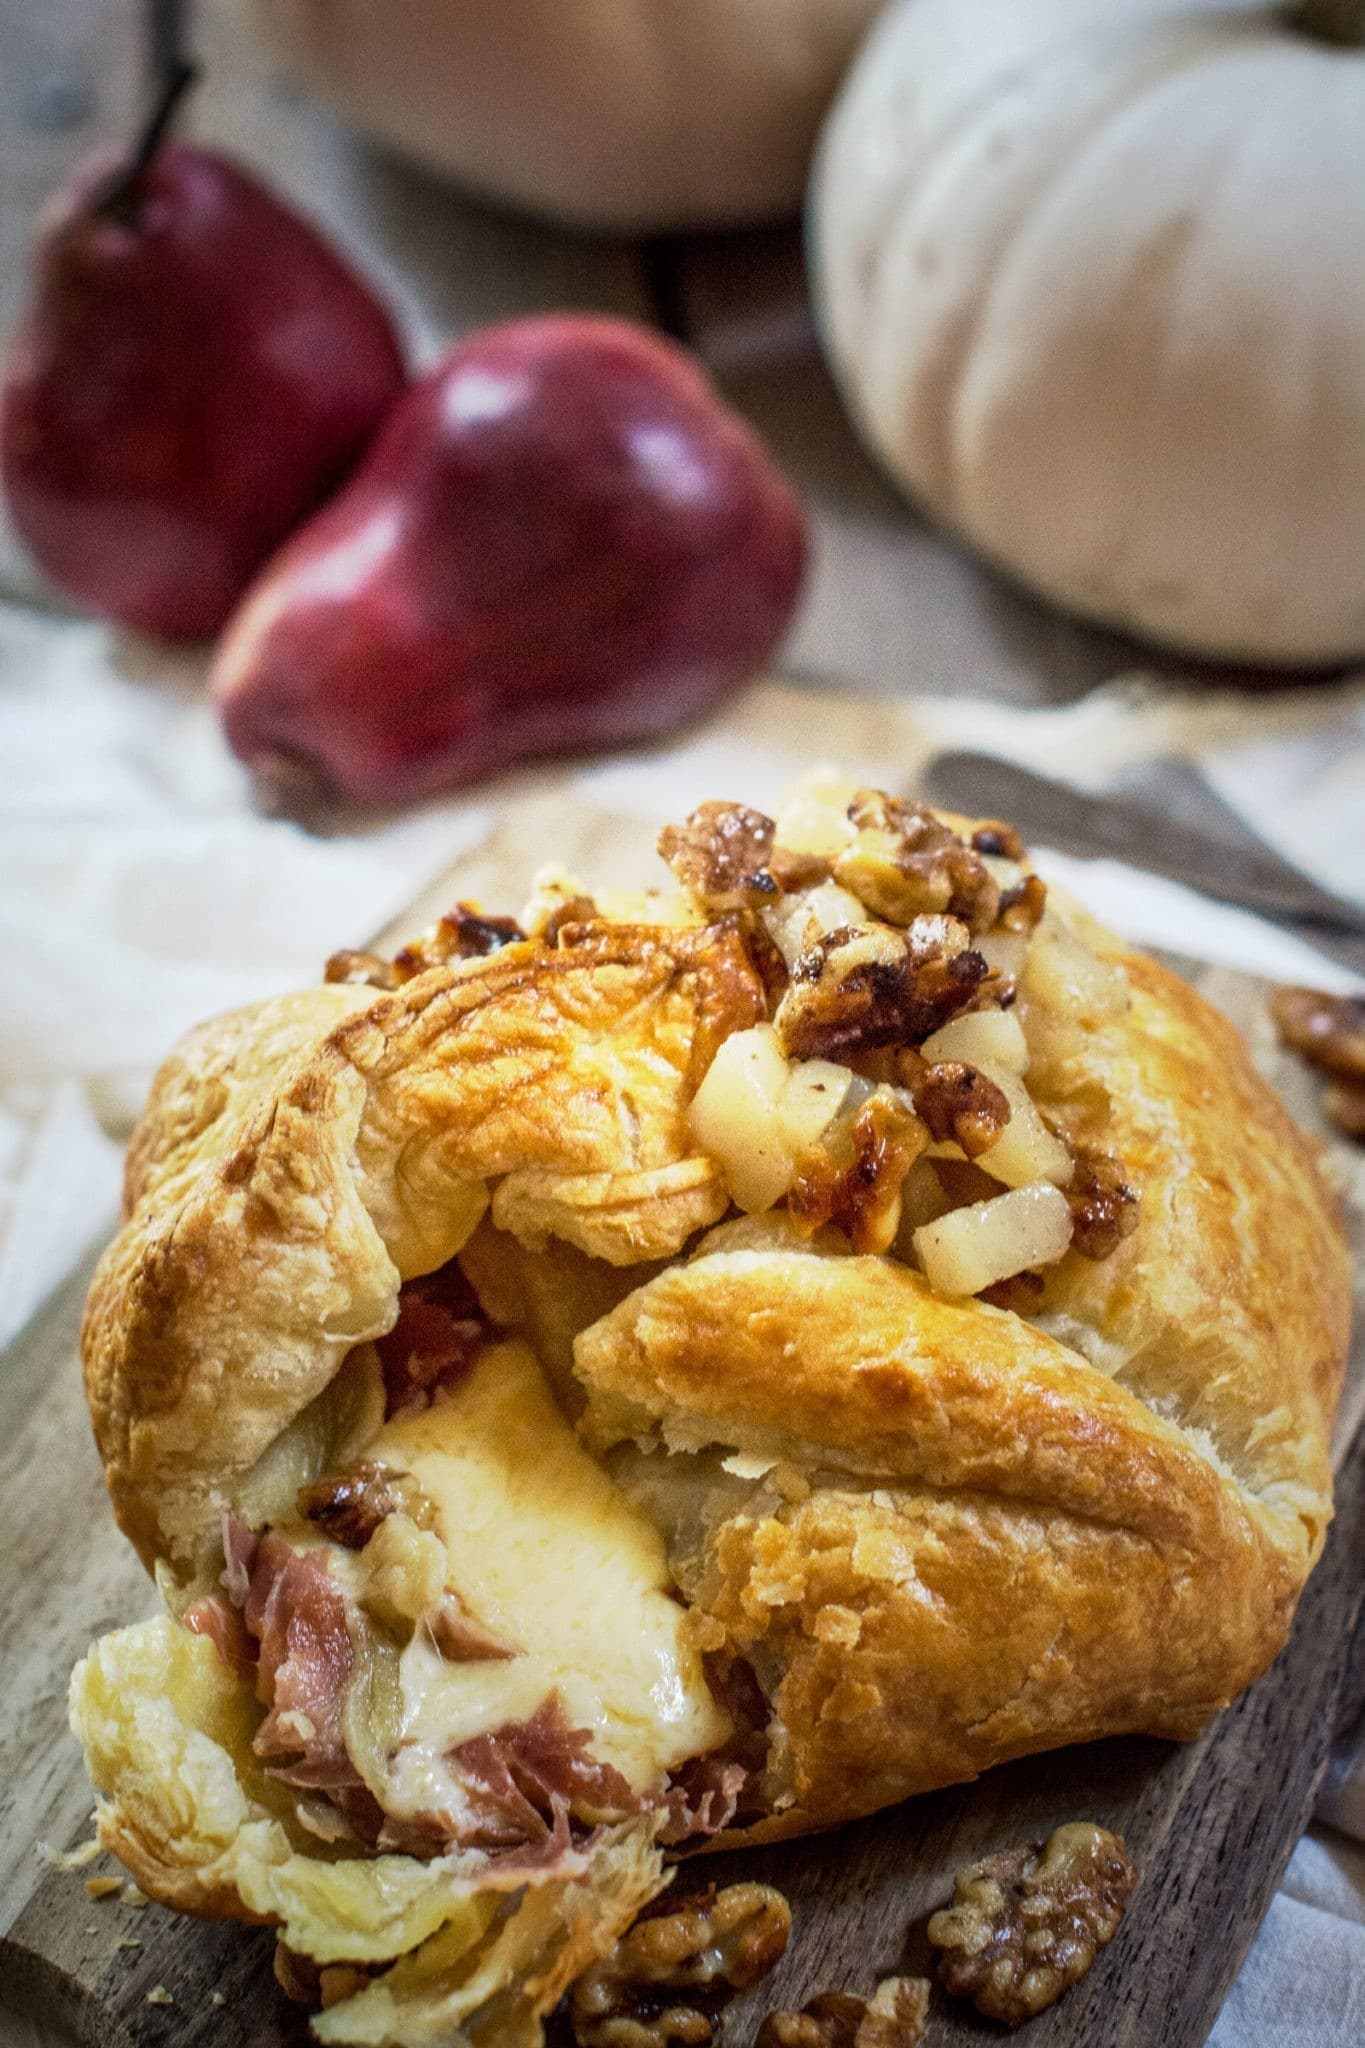 Make this gorgeous appetizer for your next get together, Bake Gouda! It's full of layers of flavors, wrapped in Prosciutto, then baked in a puff pastry and topped off with a warm Pear and Walnut Compote! Get the recipe at Little Figgy Food.